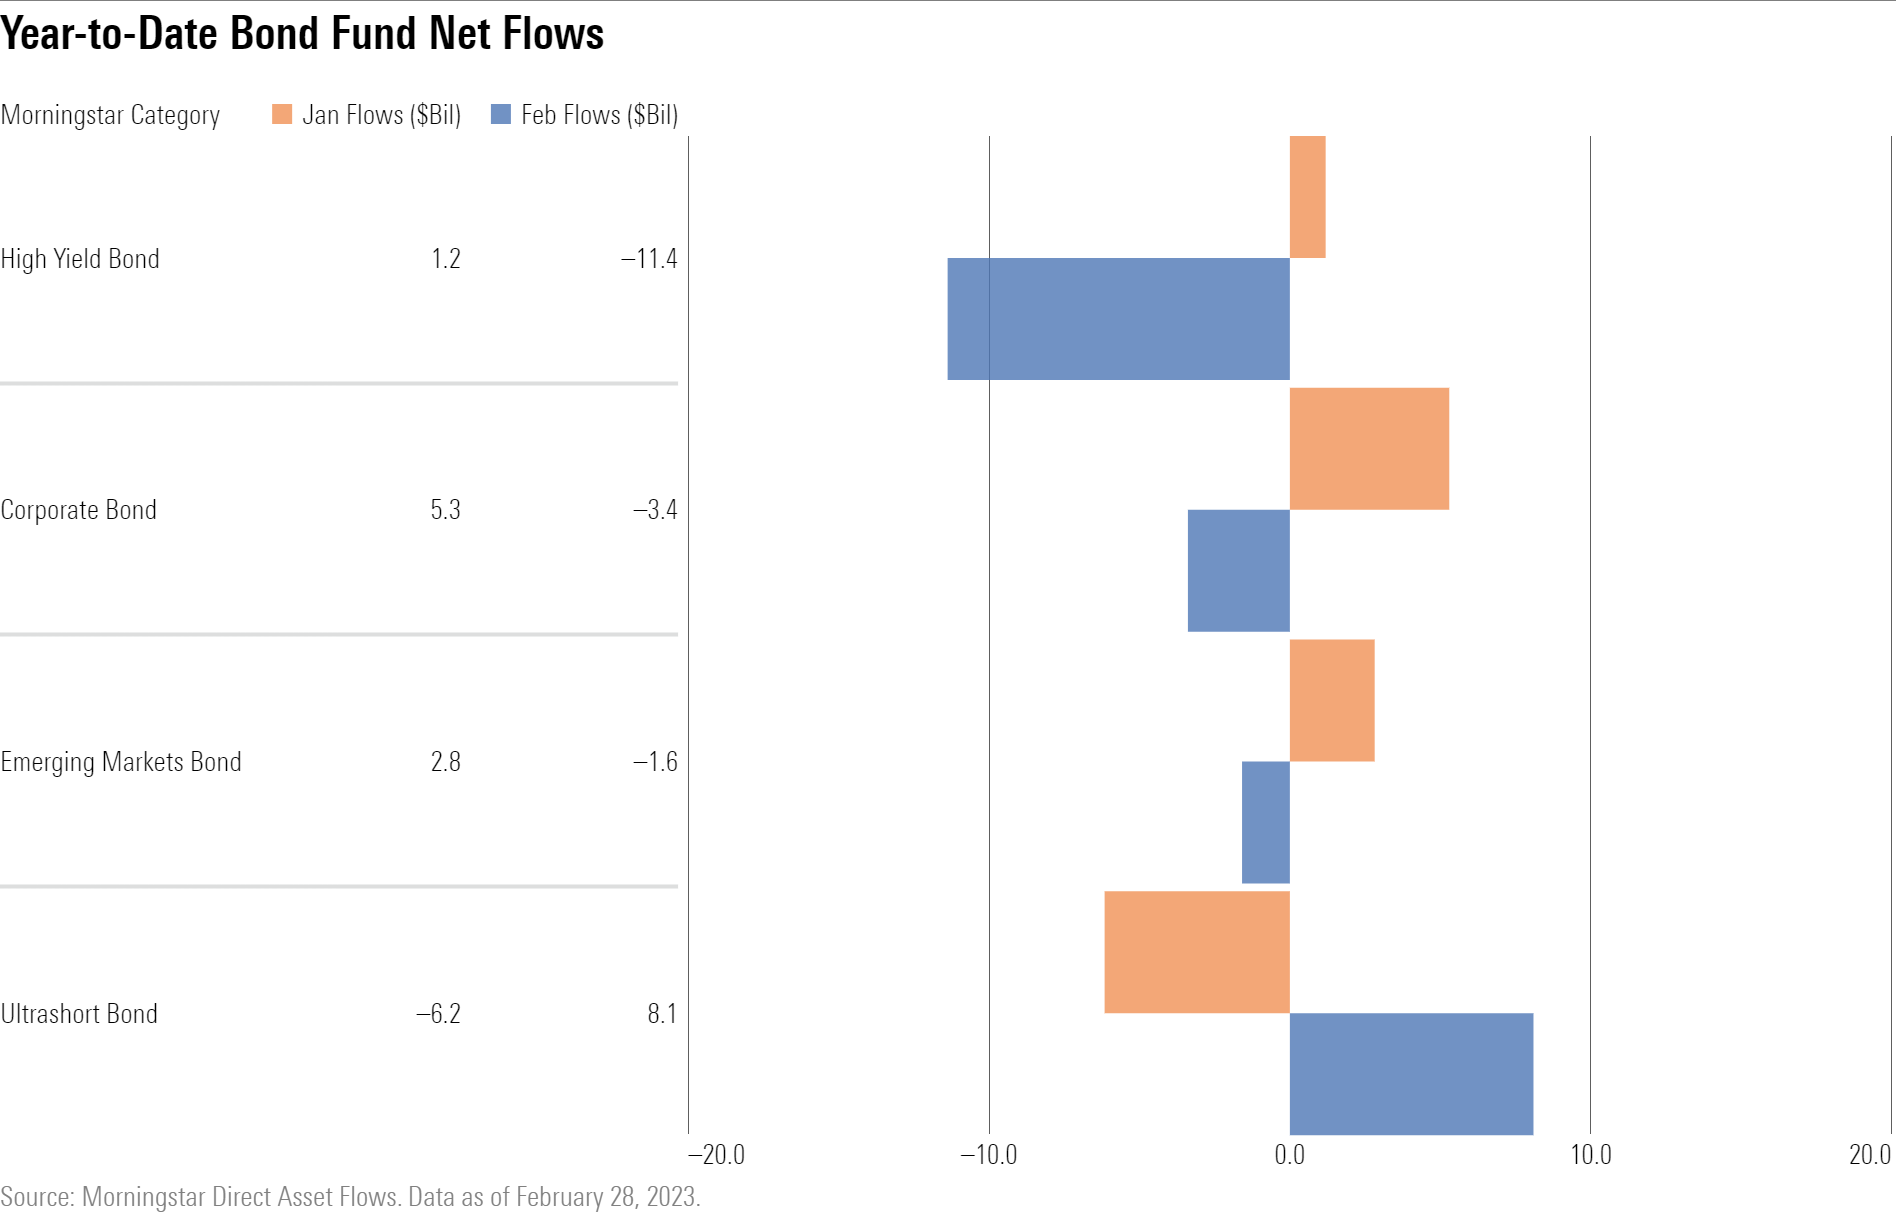 Bar chart showing January and February flows for key risky bond categories.